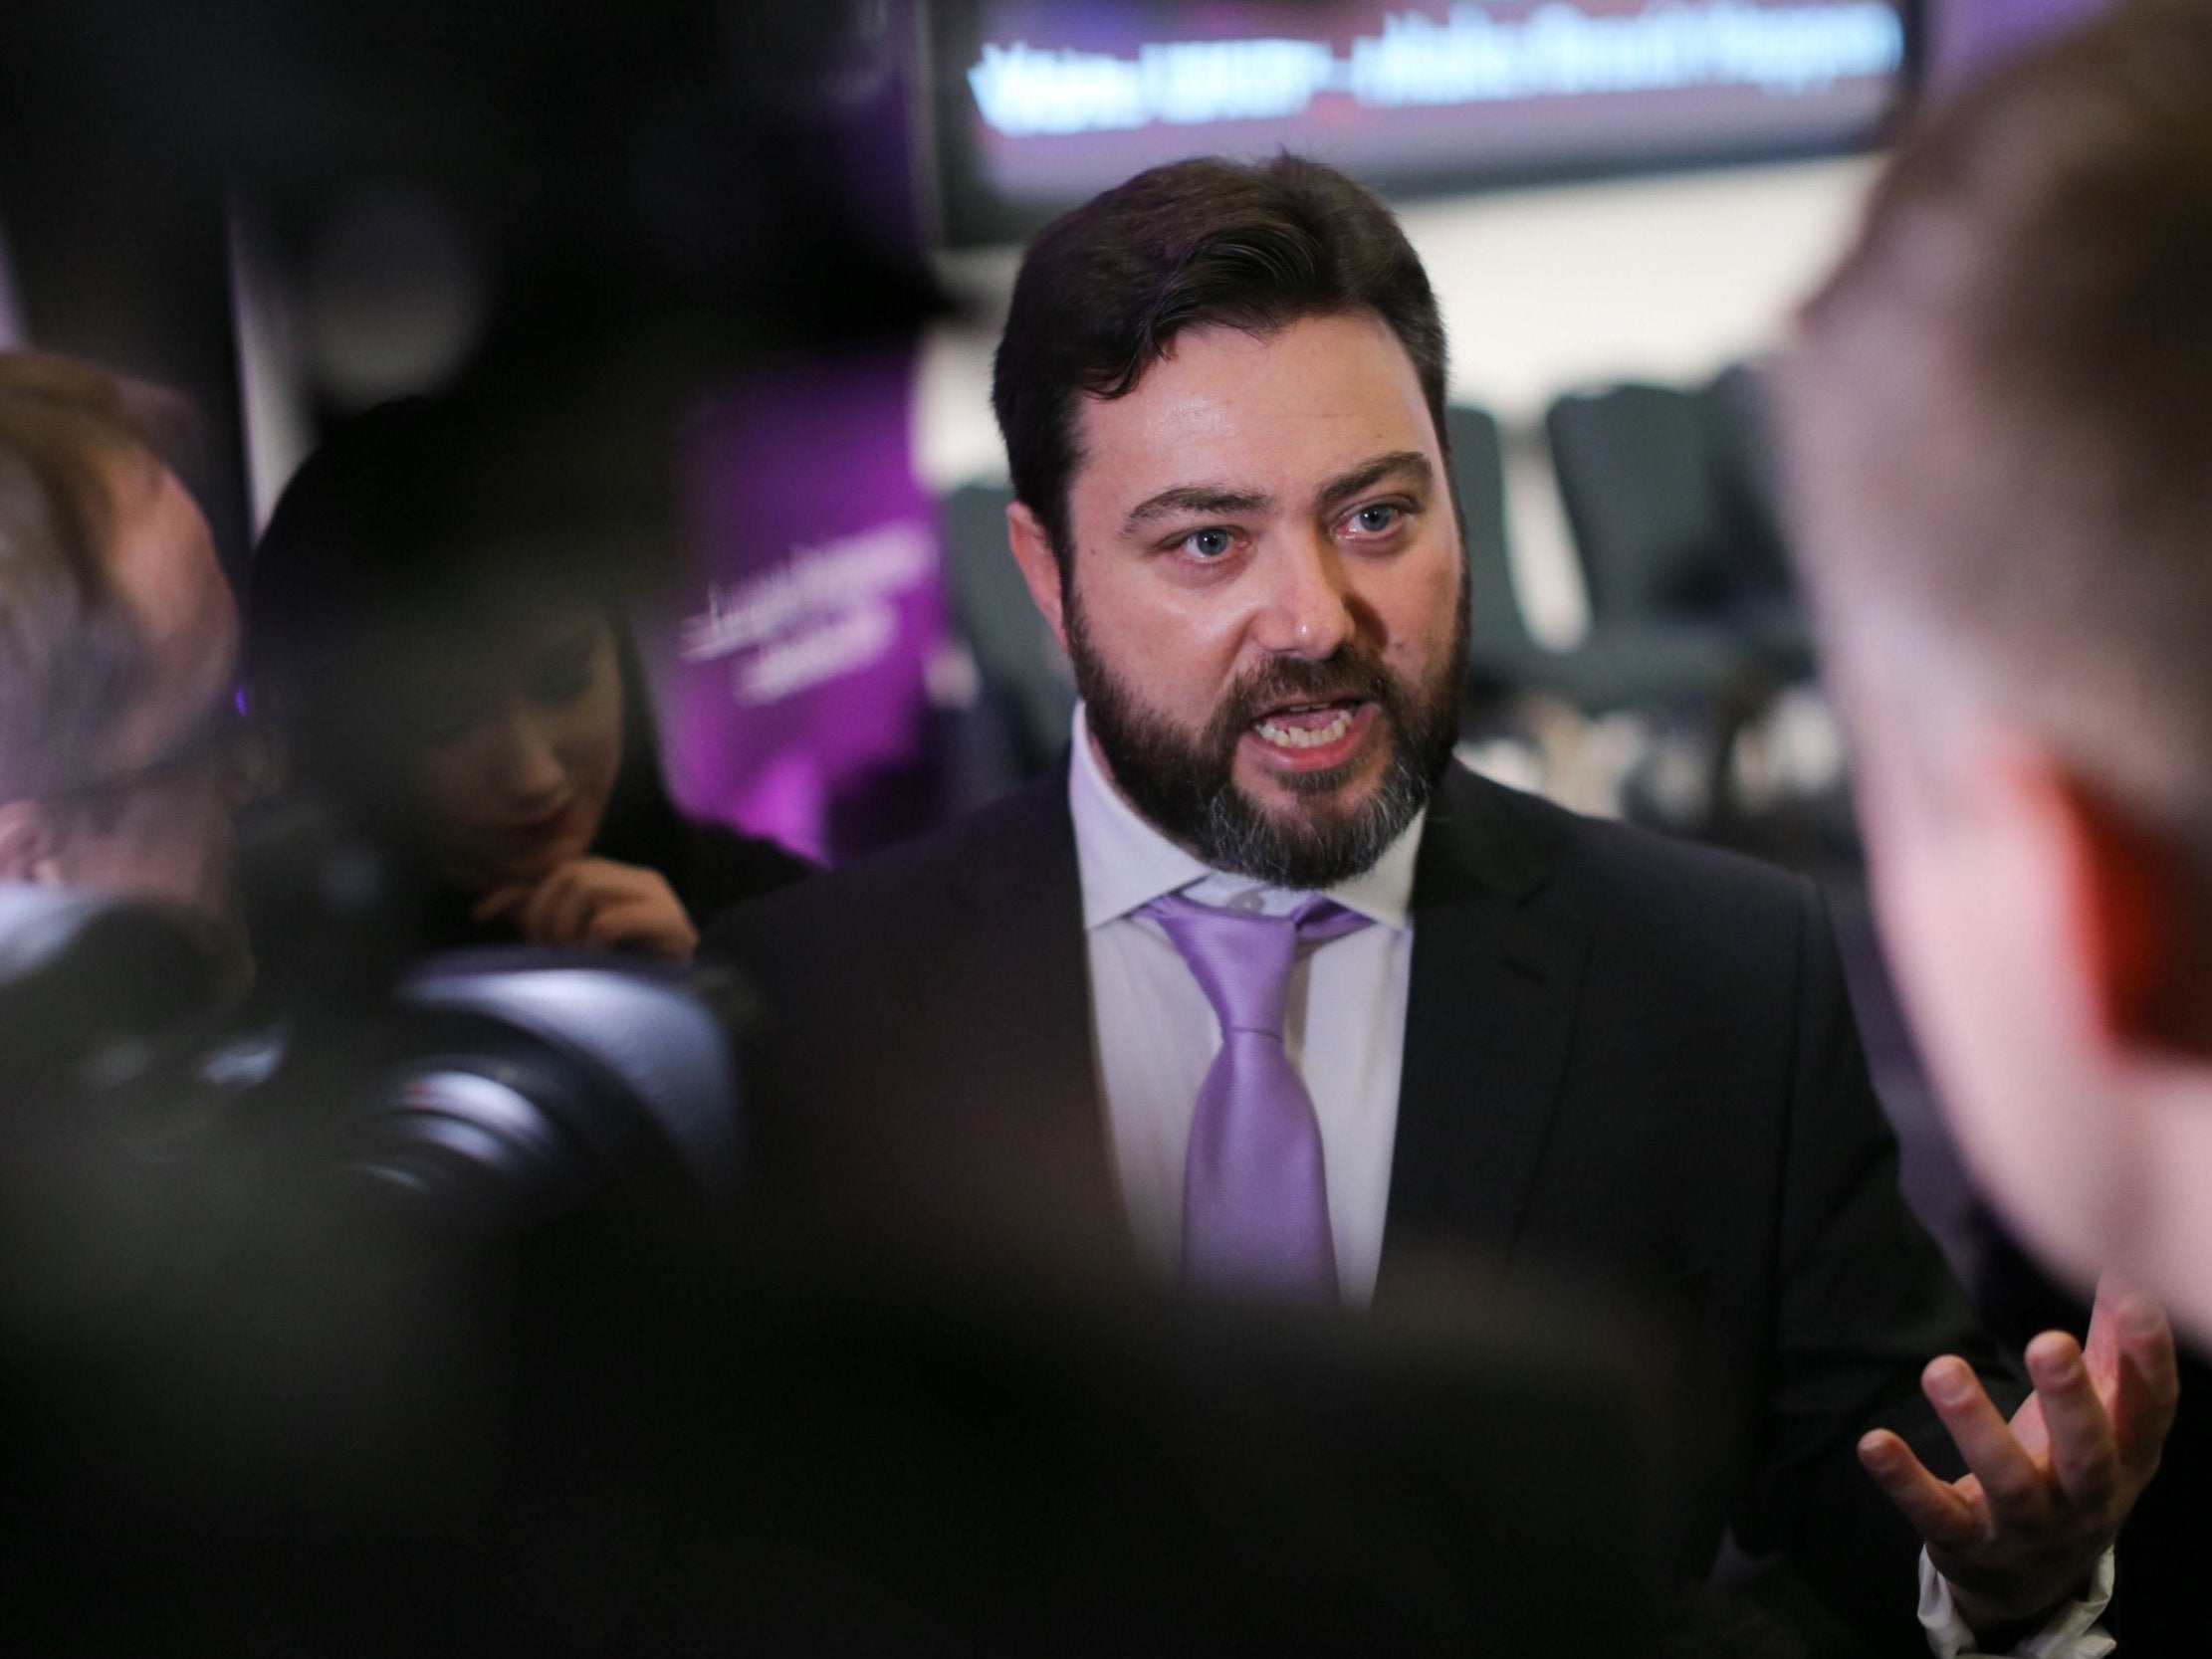 Carl Benjamin: University hustings cancelled over safety fears after Ukip candidate doused with milkshake